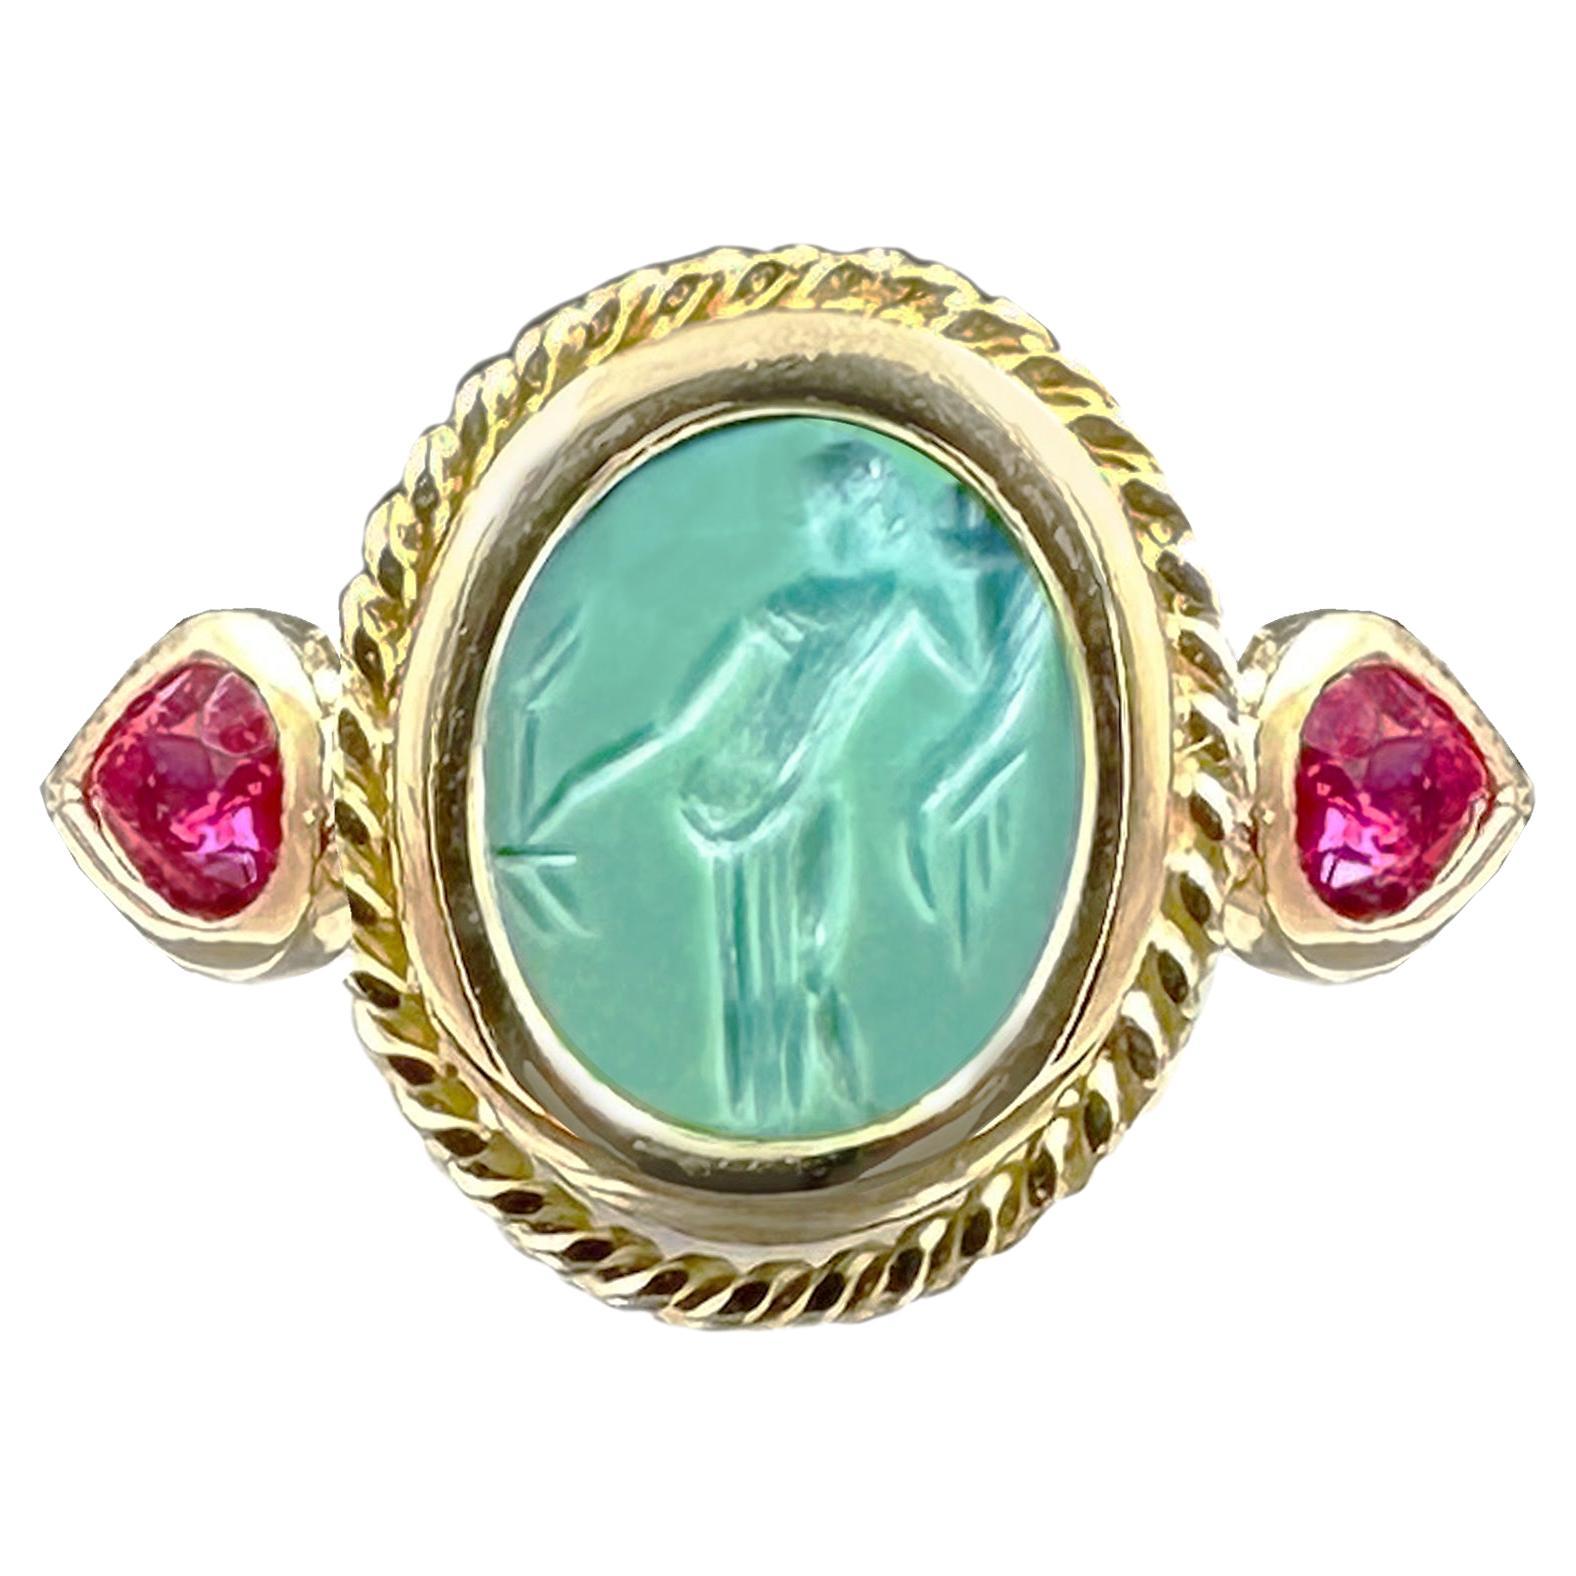 Turquoise Roman Intaglio '1st Cent AD' Depicting Goddess Fortuna 18t Gold Ring